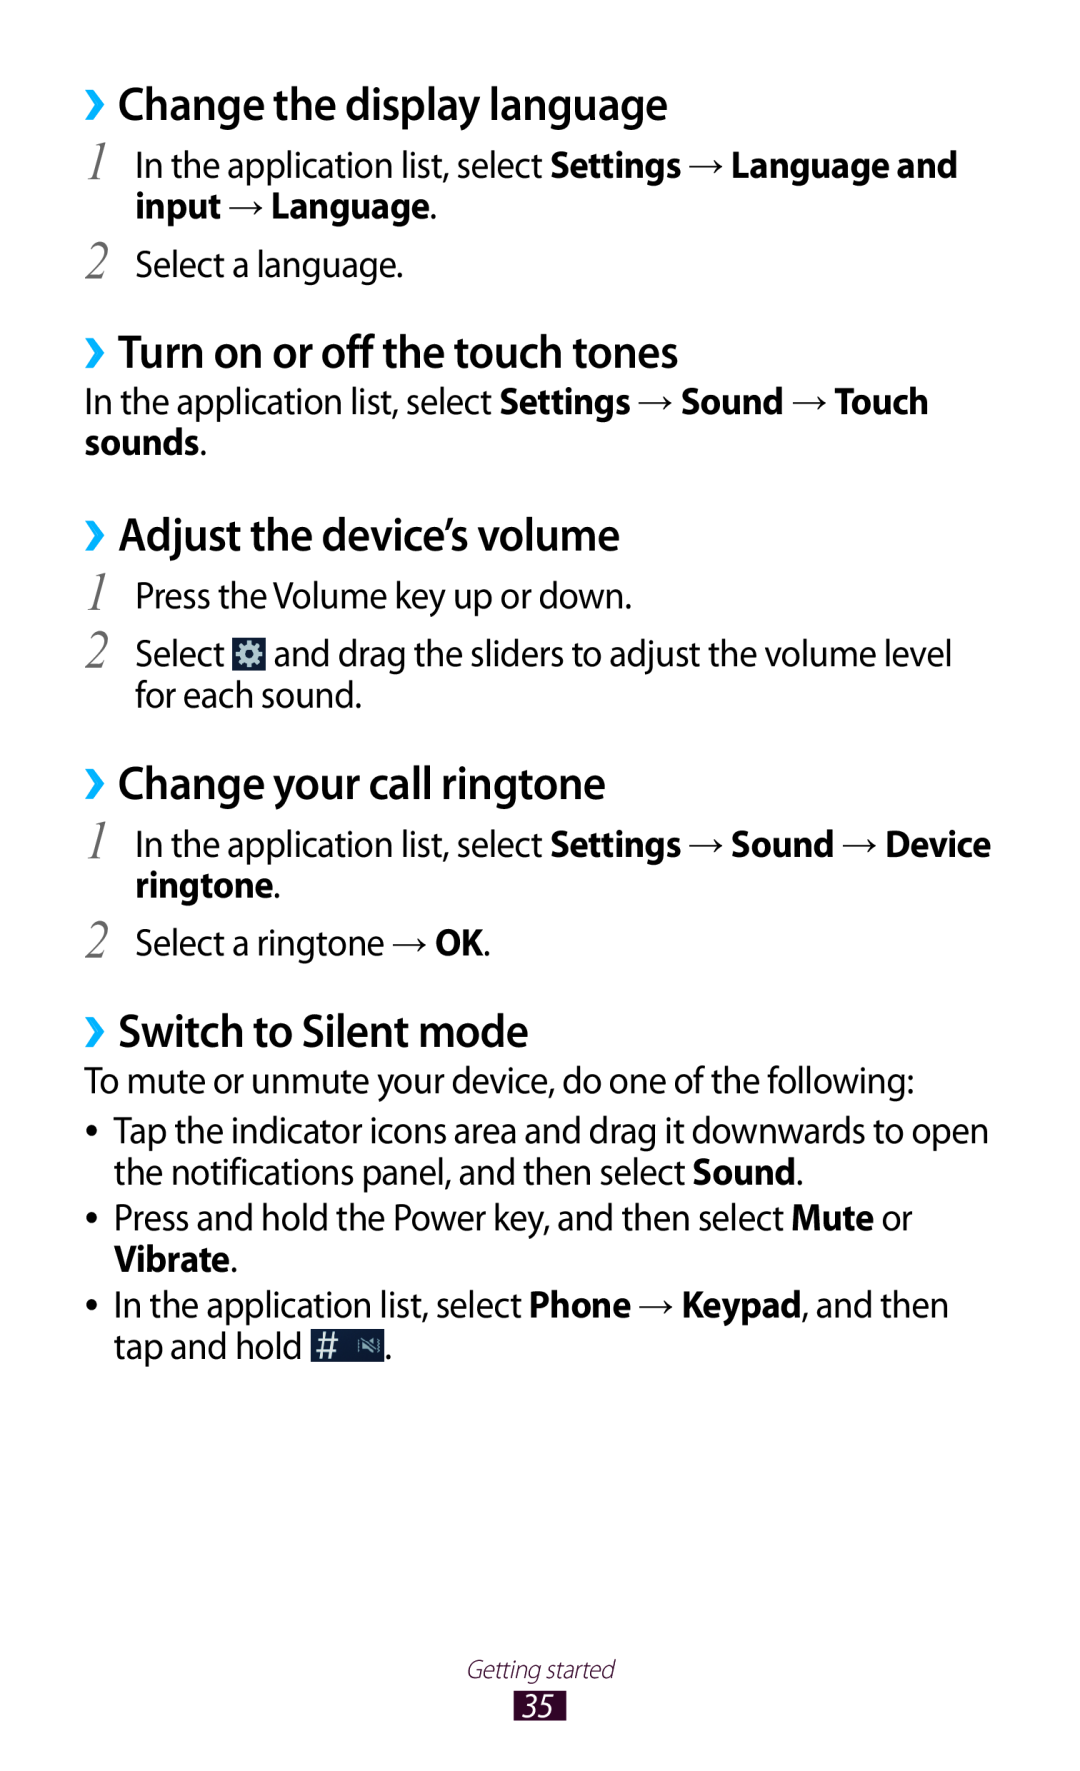 Samsung GT-I8160ZWASEB manual ››Change the display language, ››Turn on or off the touch tones, ››Adjust the device’s volume 